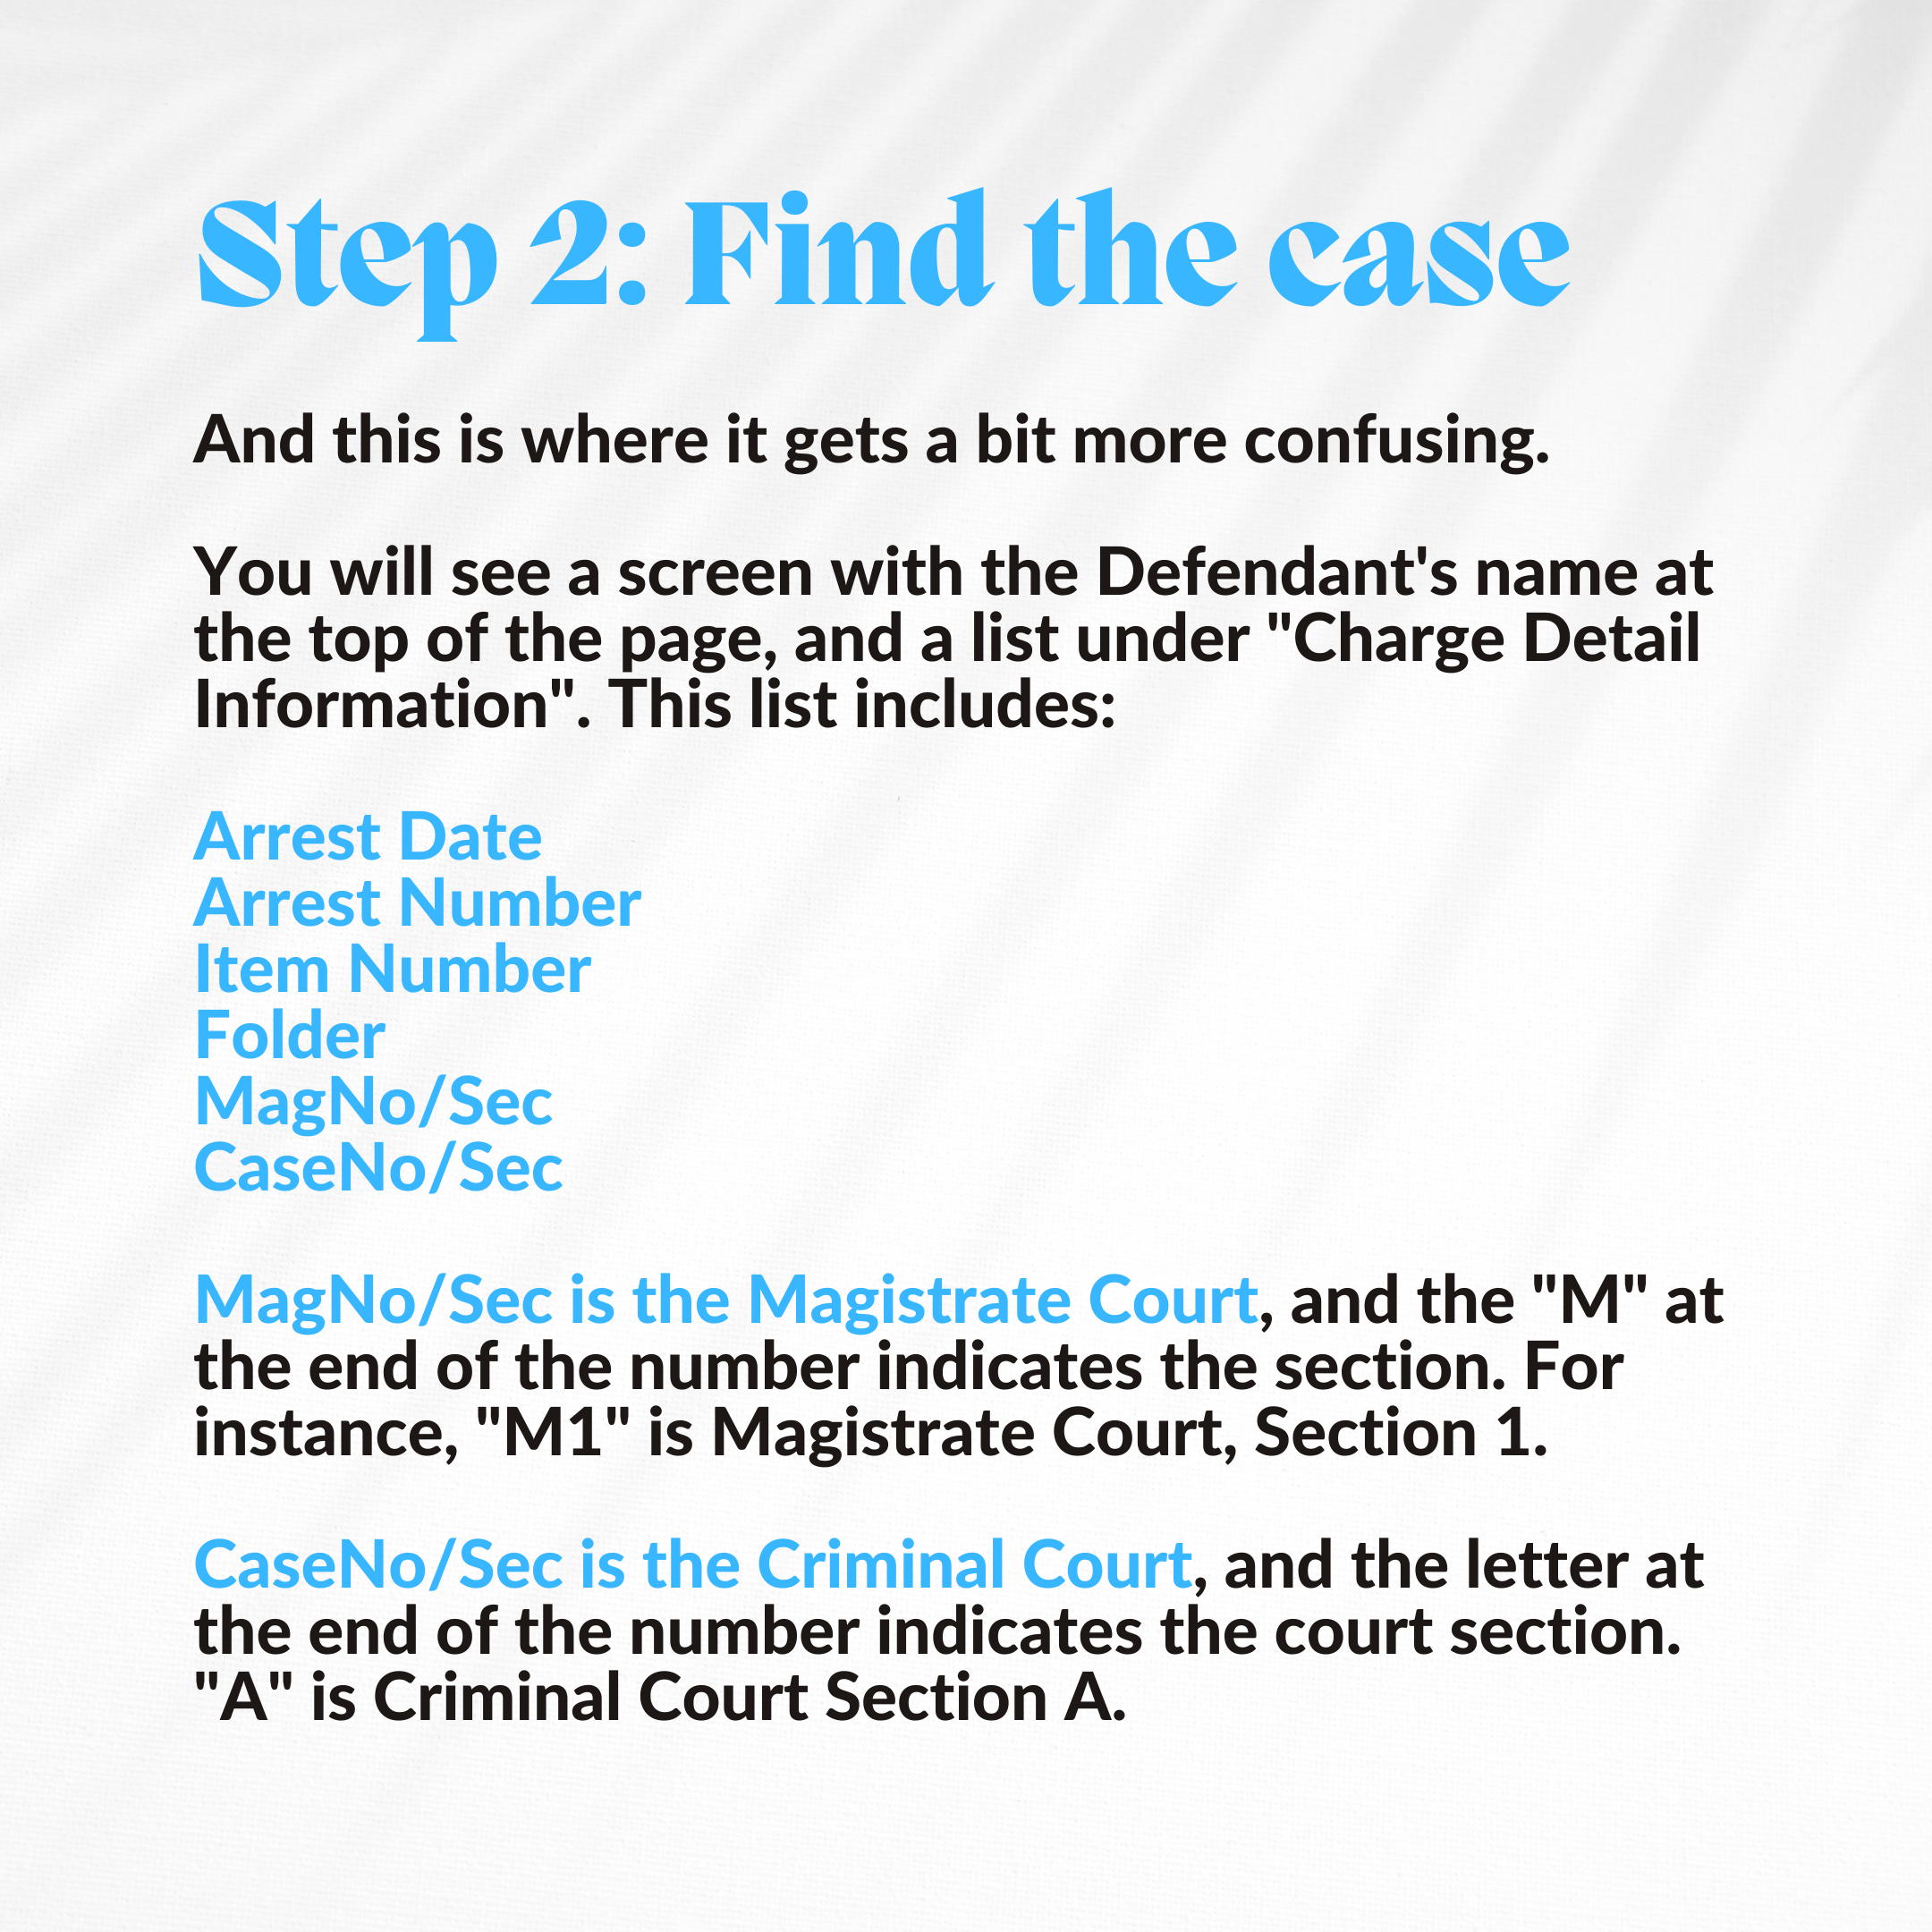 Step 2: Find the Case